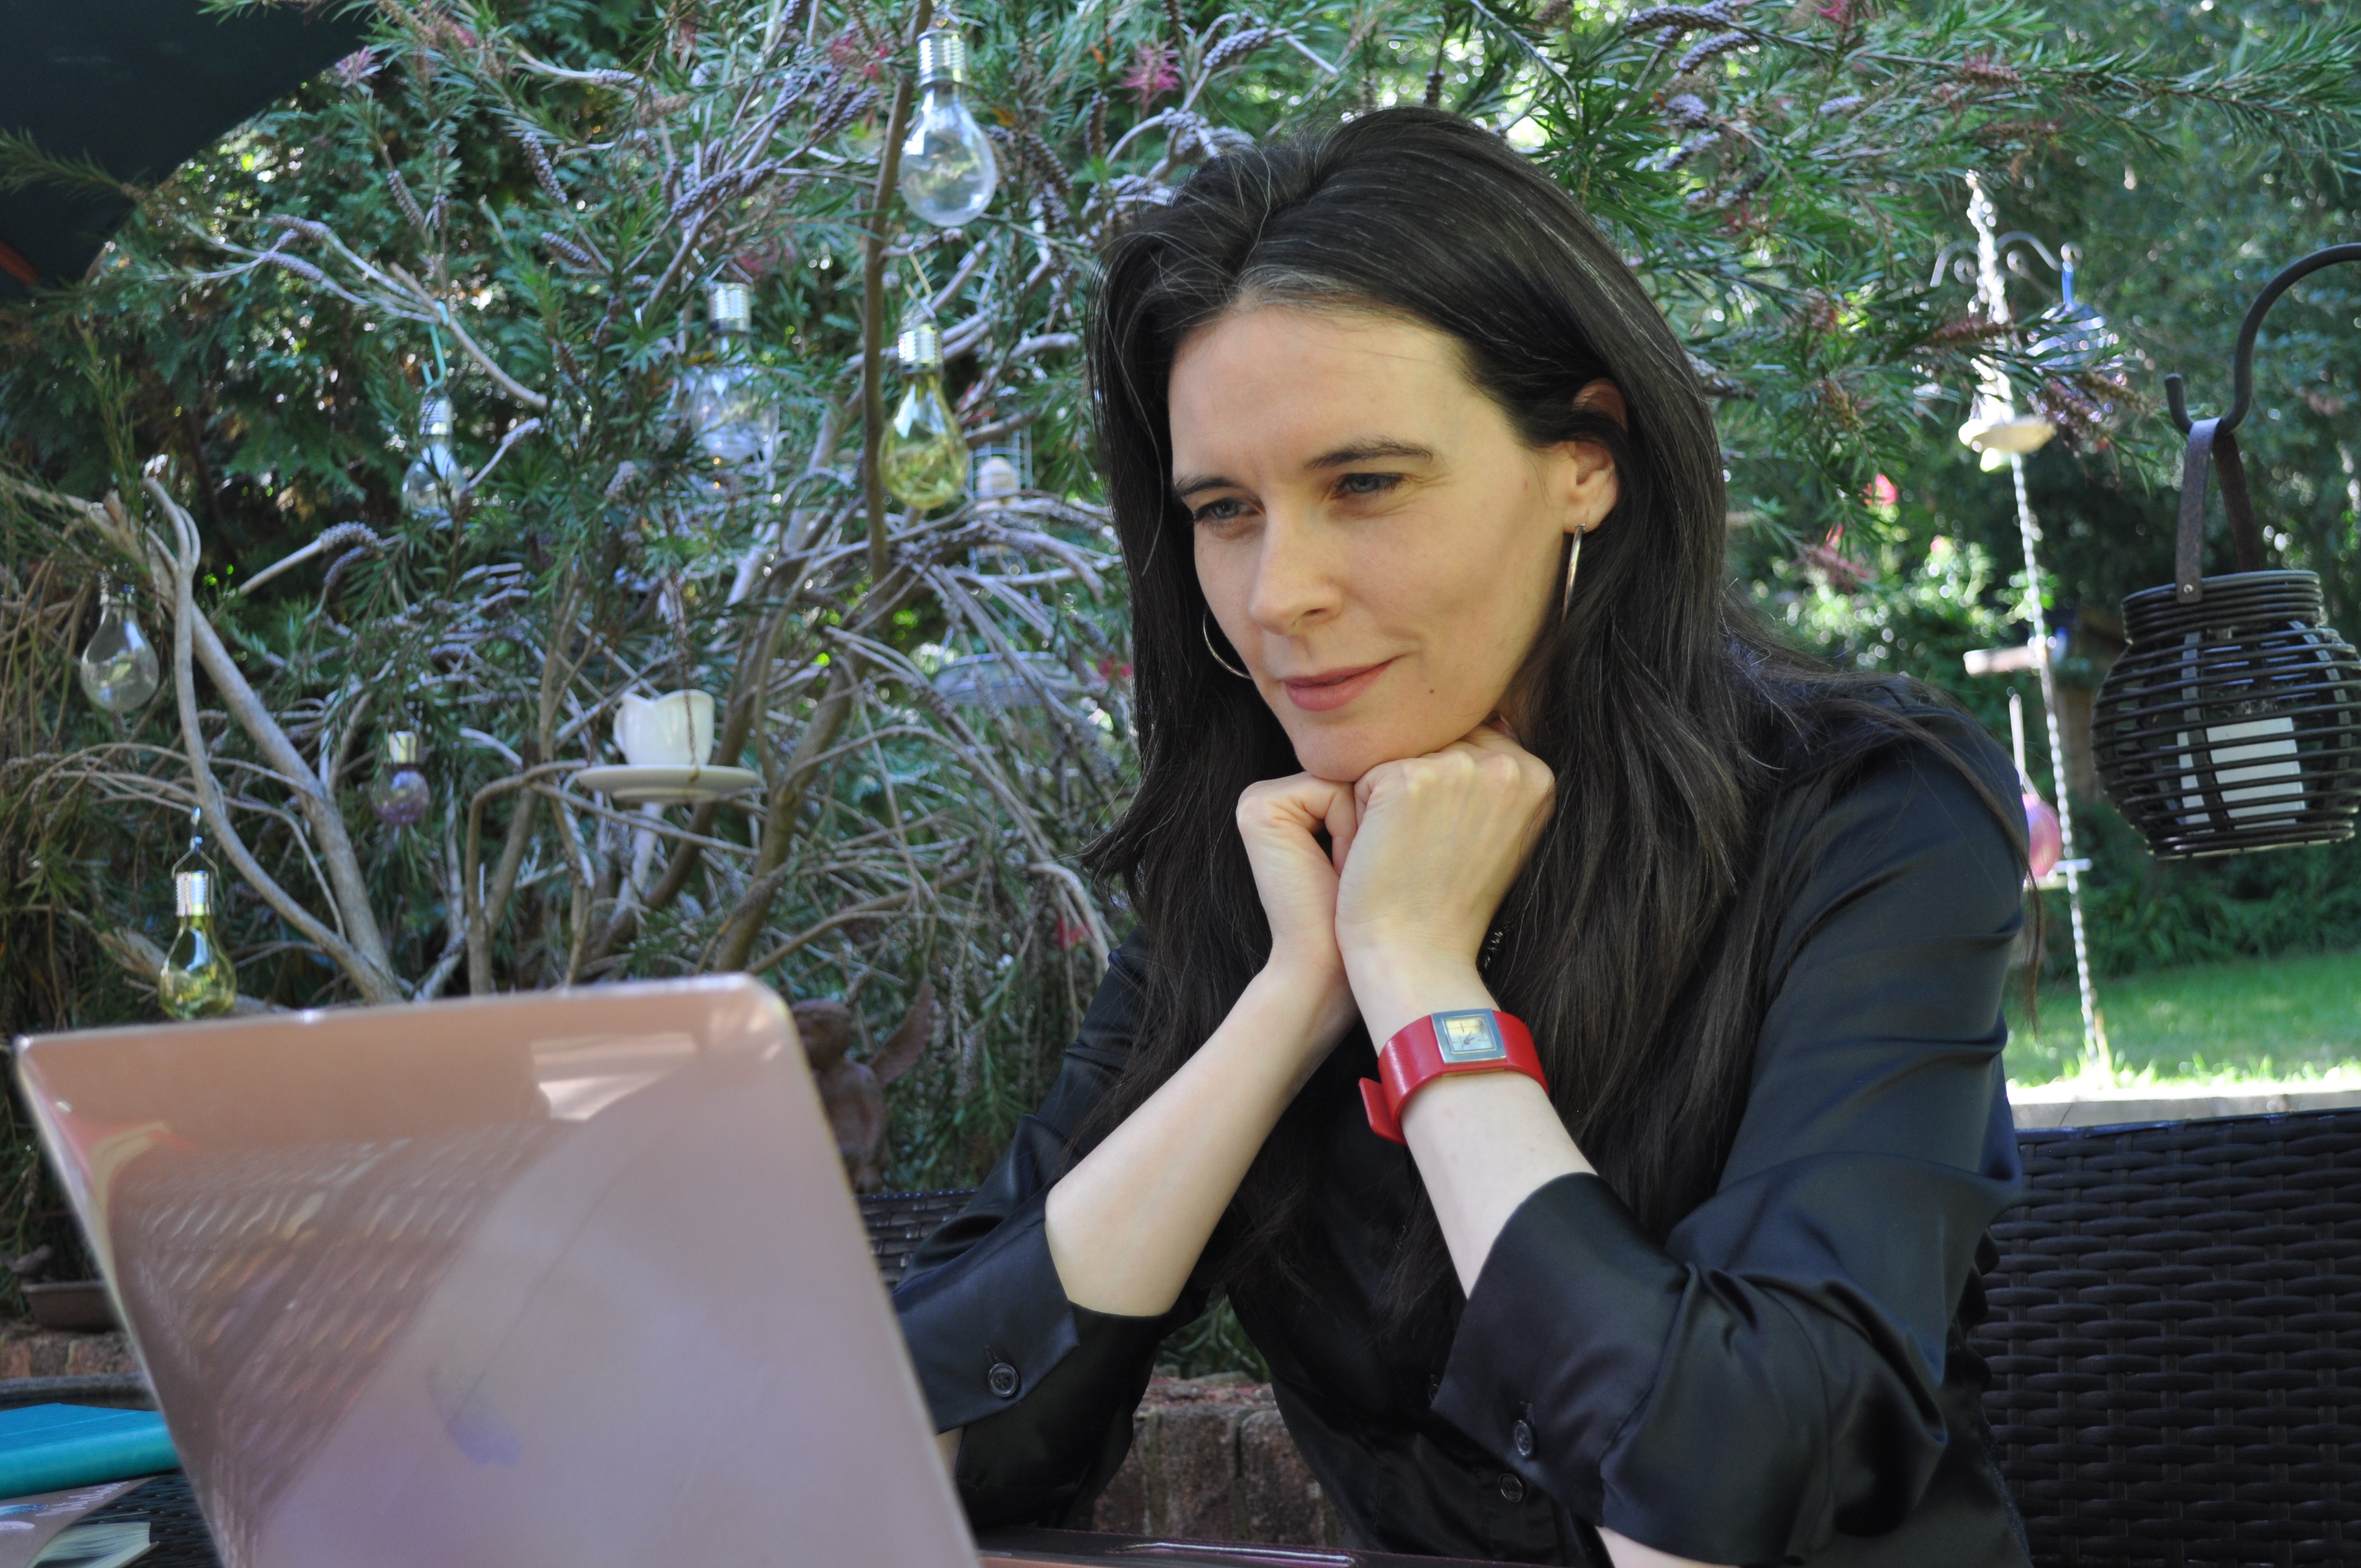 Jacqui McGinn (dark-haired white woman wearing a black blouse) looks down at her MacBook with her chin resting on her hands. A tree and garden are behind her.